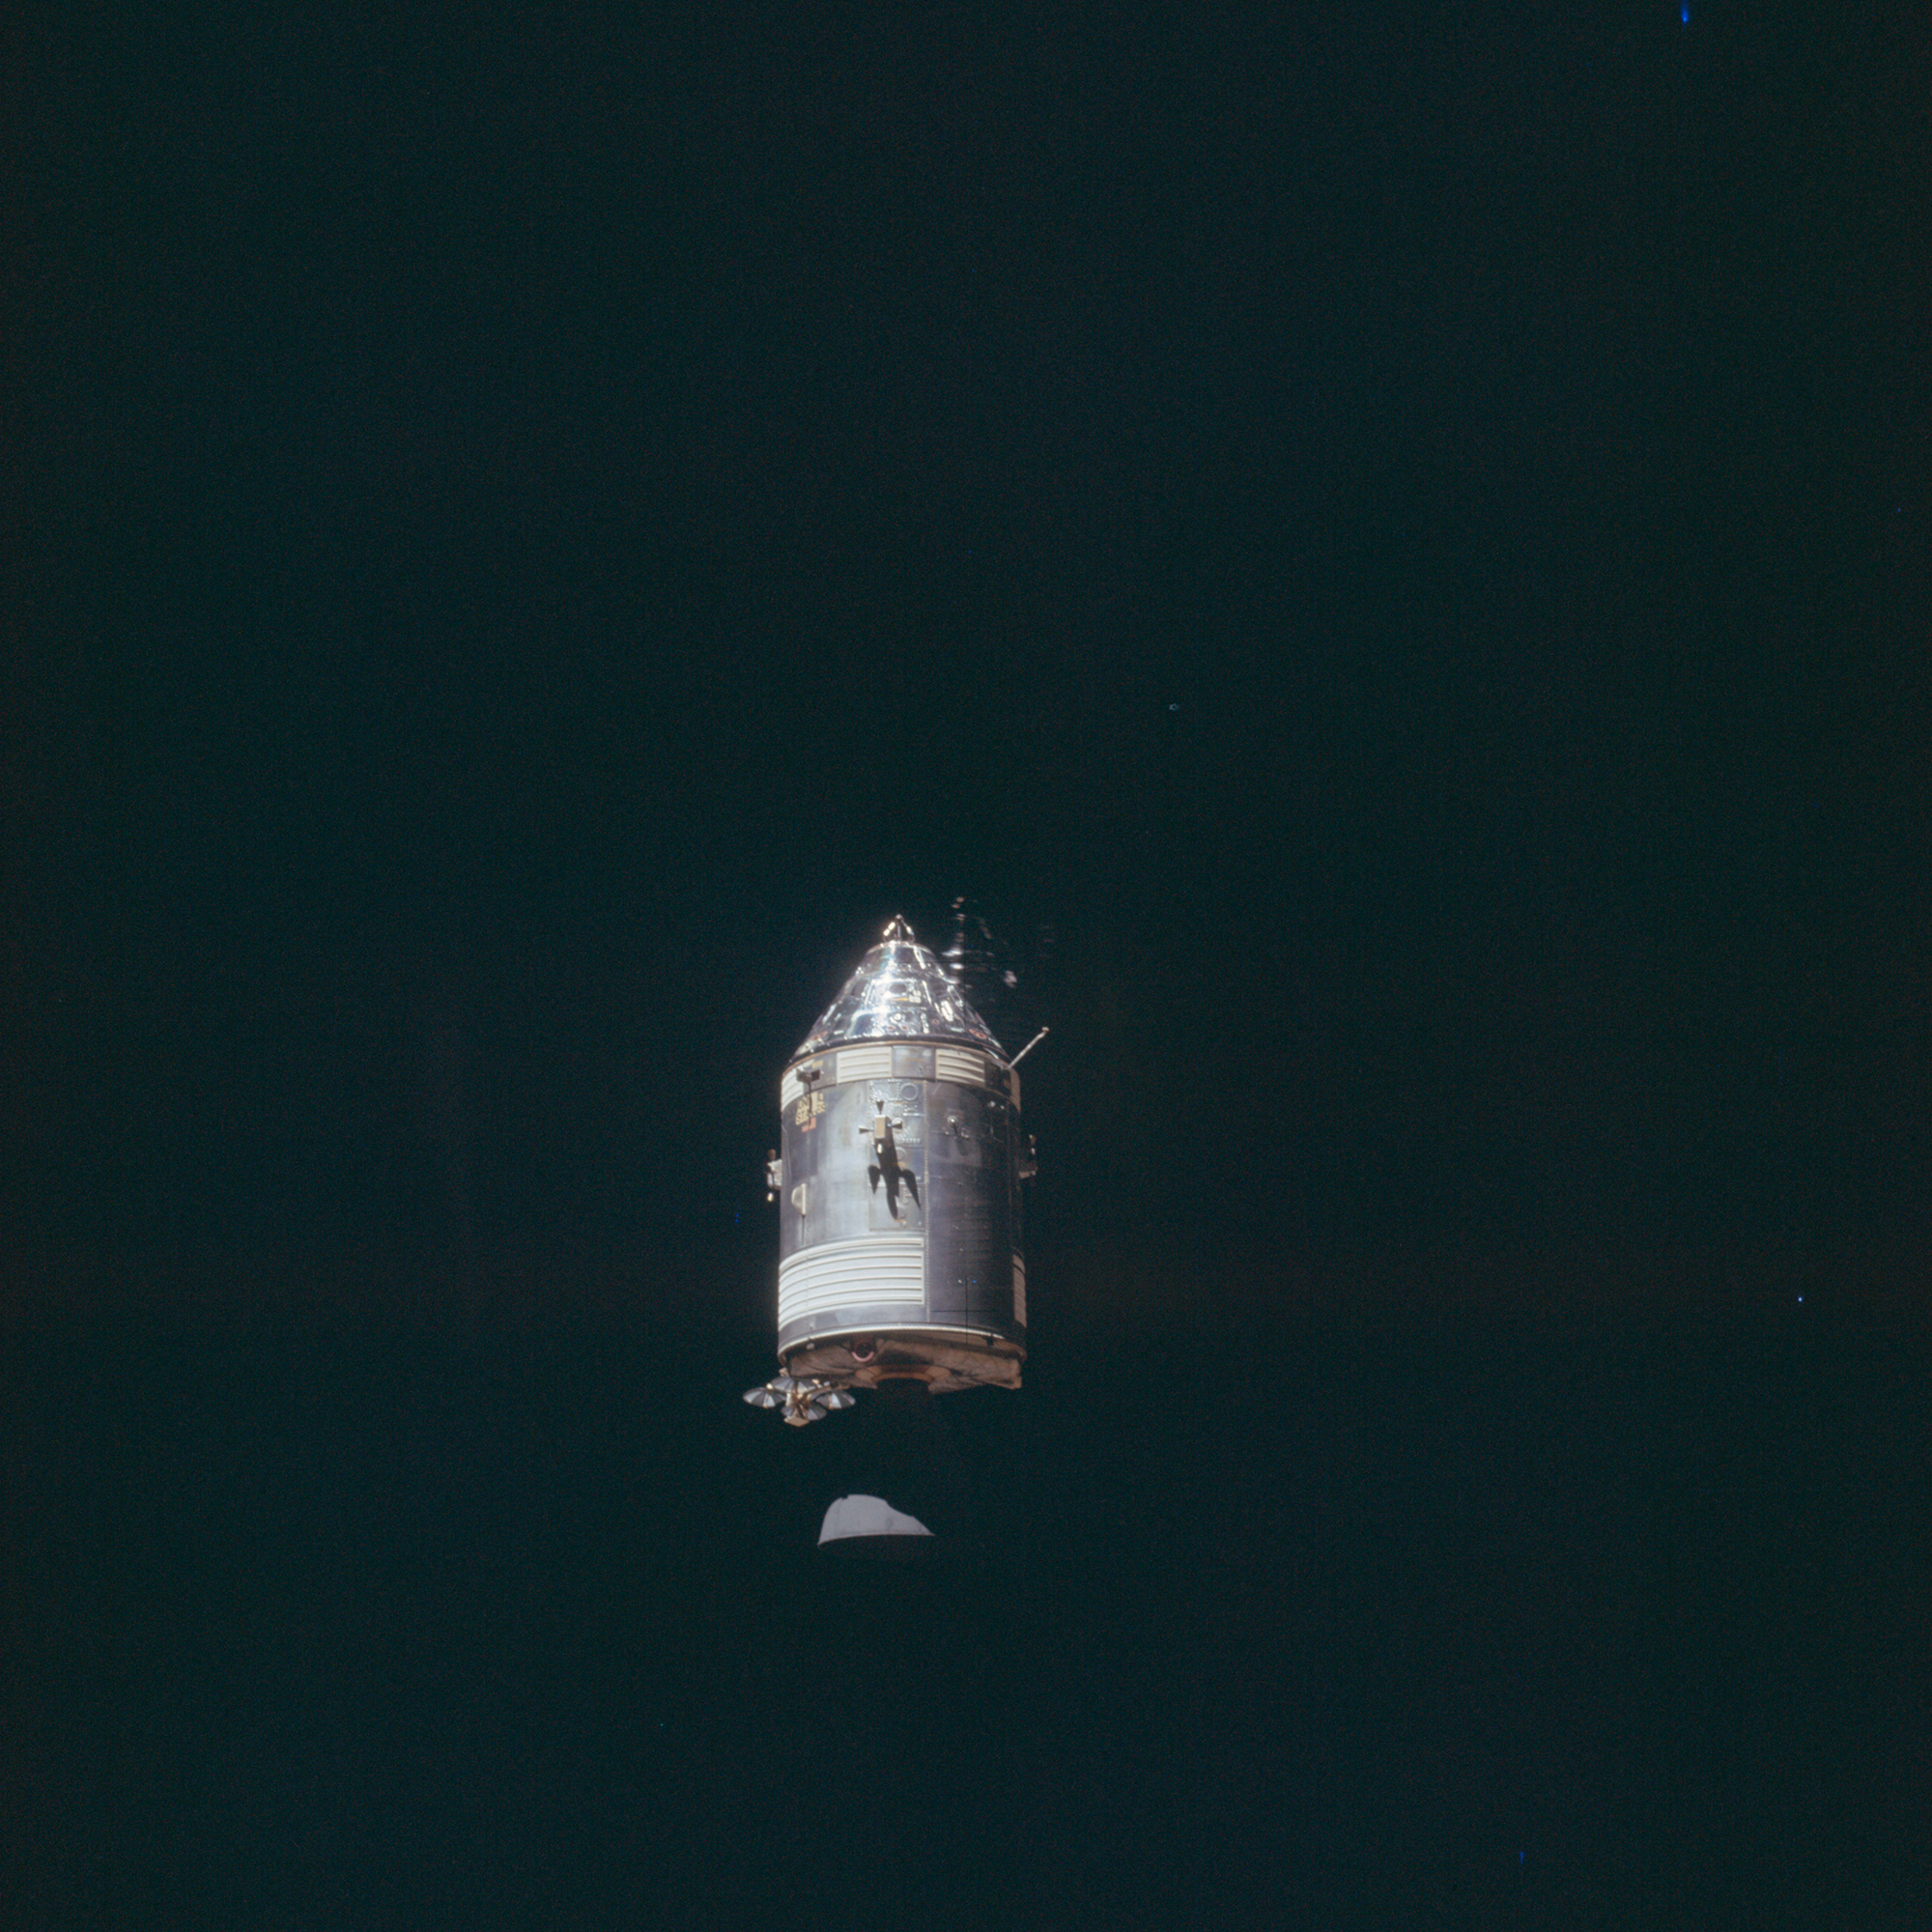 apollo-14-command-and-service-module-kitty-hawk-from-the-lunar-module-at-rendezvous.jpg